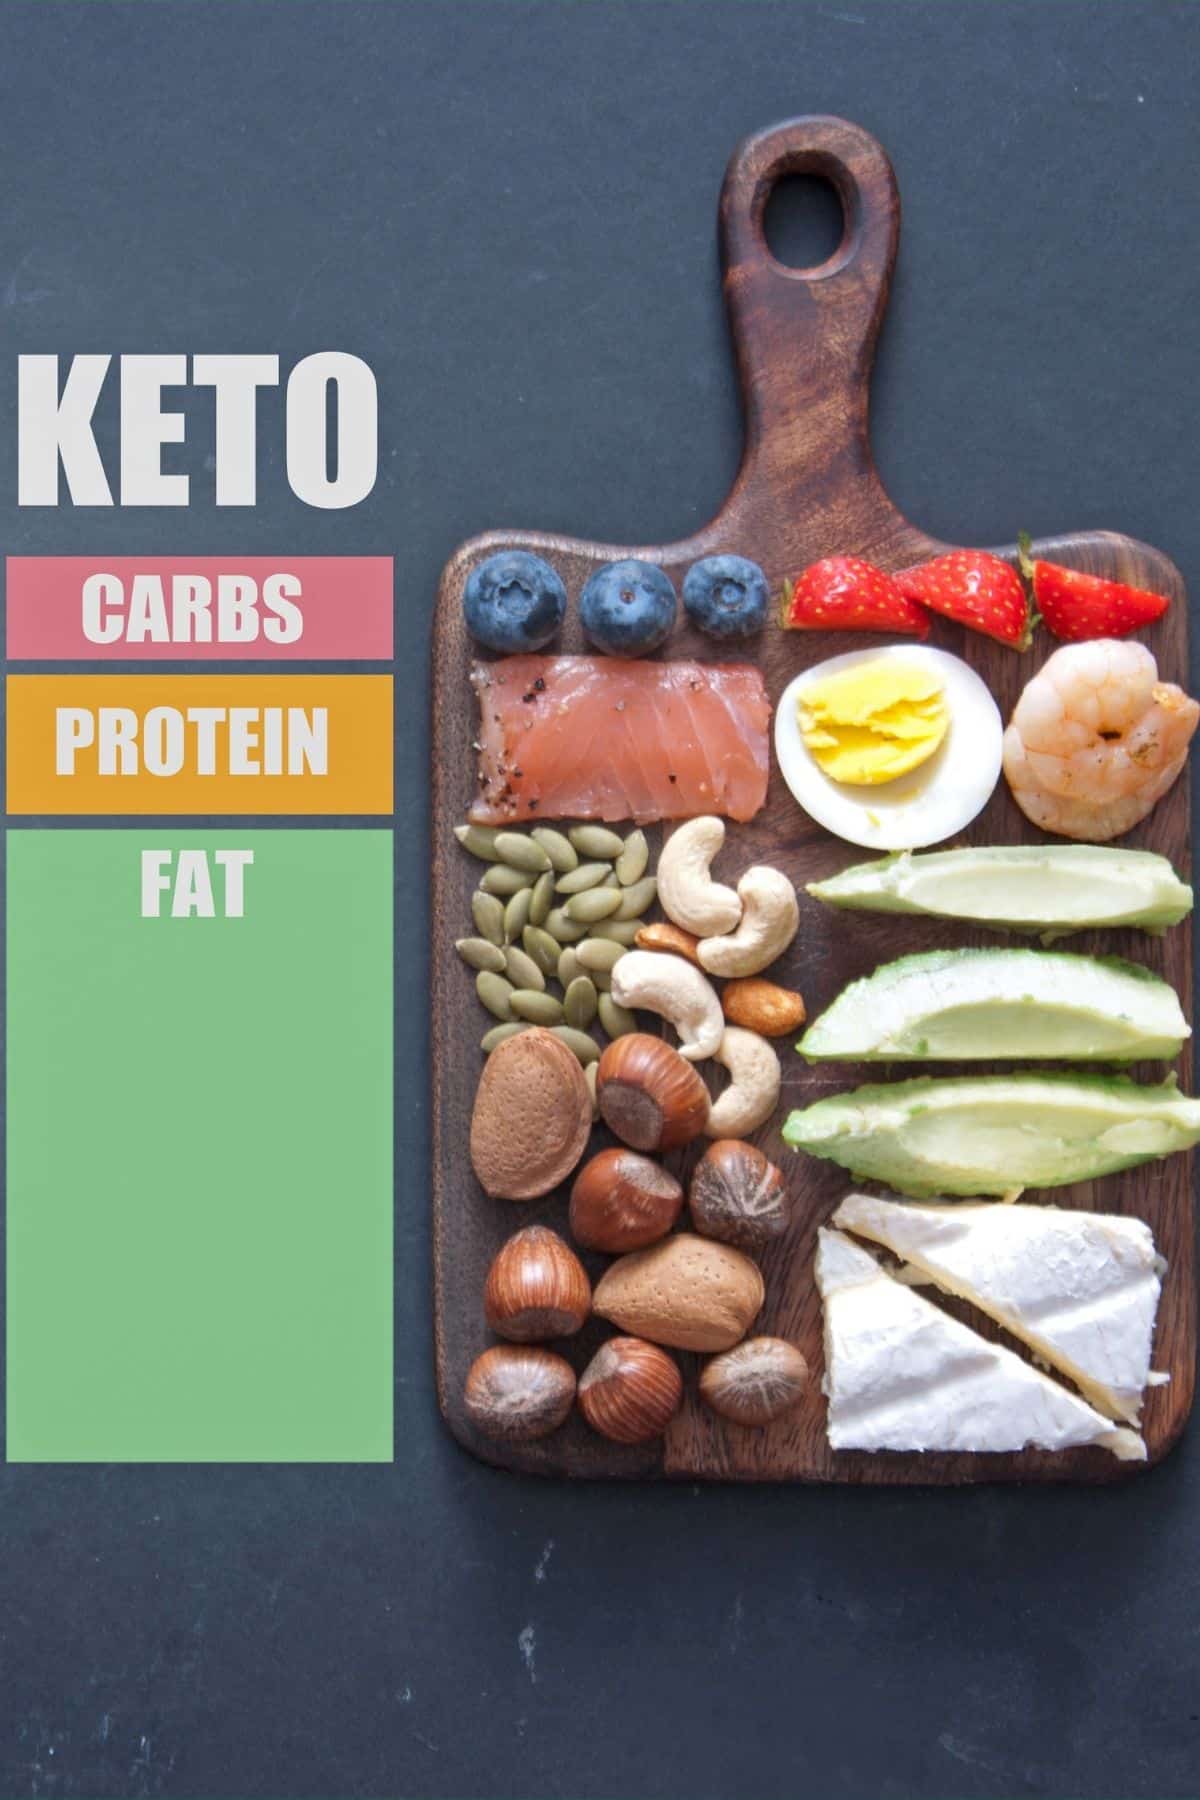 graph showing the breakdown of carbs, protein, and fat on a keto diet.